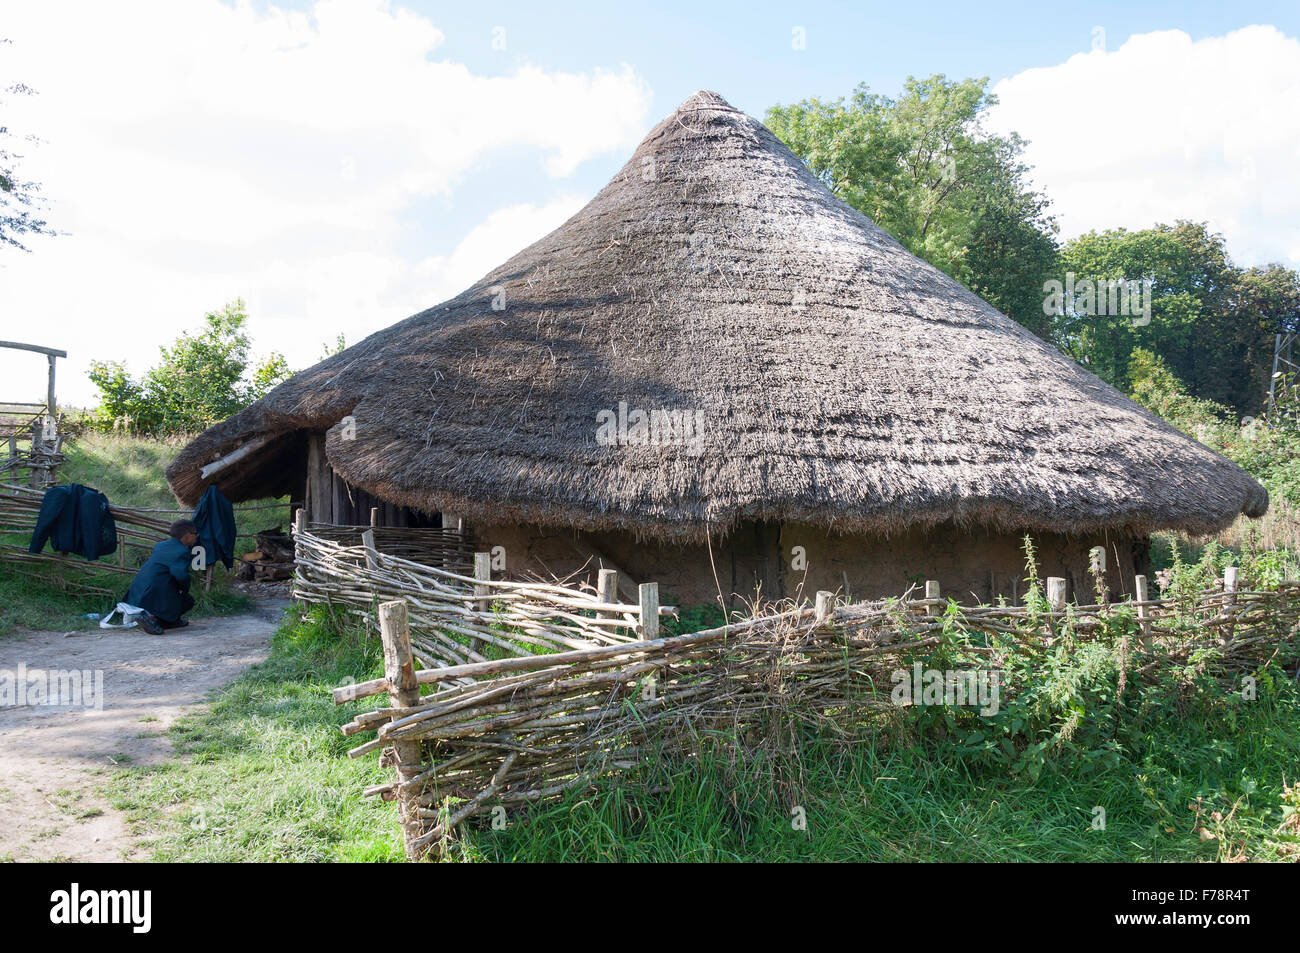 Iron Age House, Chiltern Open Air Museum, Chalfont St Giles Buckinghamshire, England, United Kingdom Stock Photo